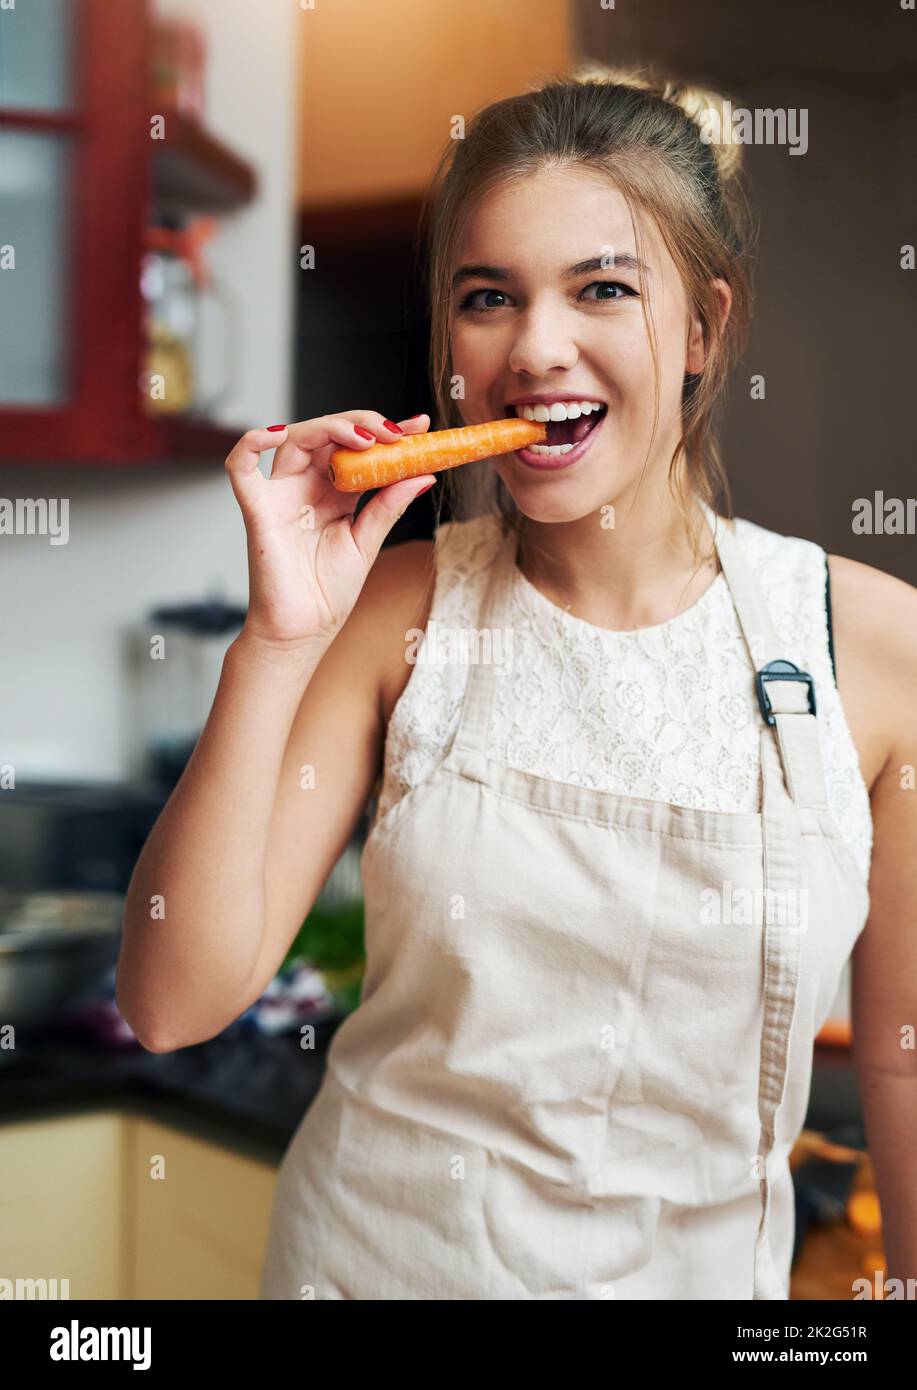 When hunger strikes.... Cropped portrait of an attractive young woman taking a bite of a carrot at home. Stock Photo